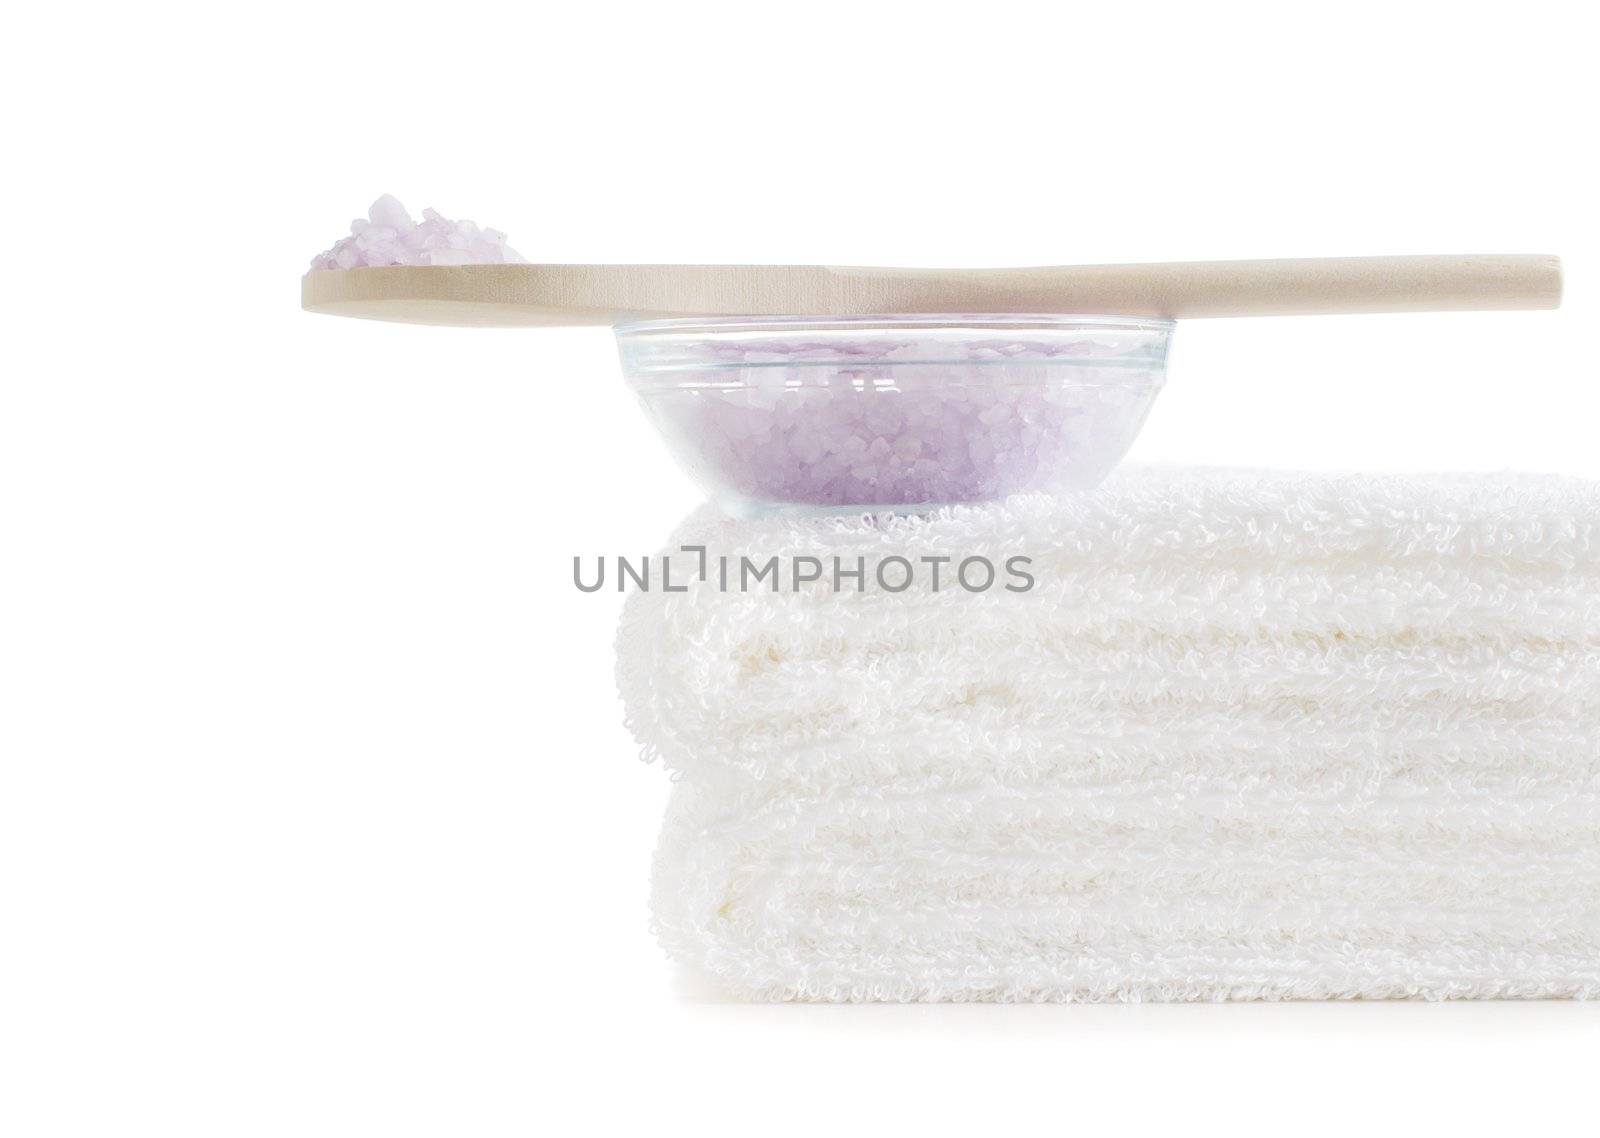 Towels and bath salt being displayed against a white background.